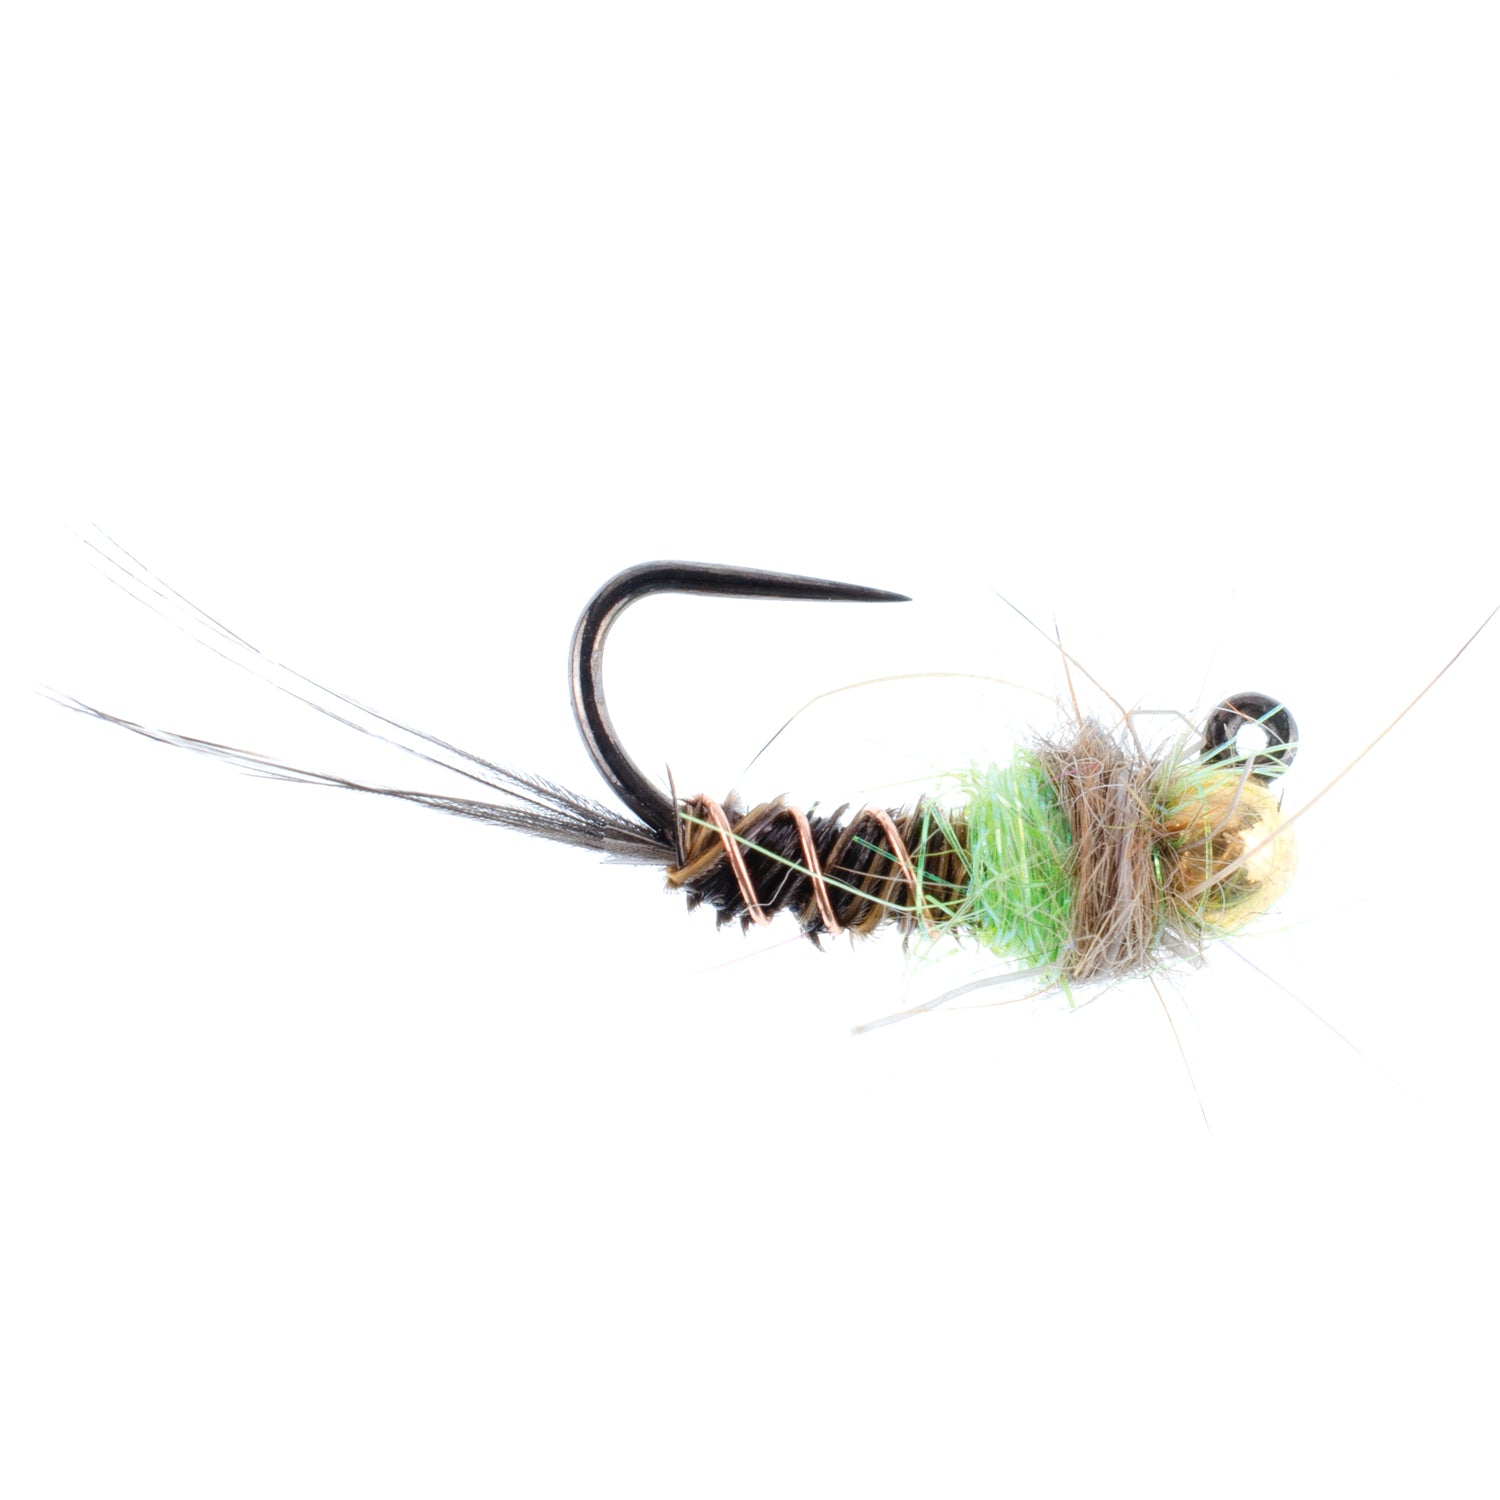 Tungsten Bead Hot Spot Pheasant Tail Tactical Jig Chartreuse Czech Nymph Euro Nymphing Fly - 6 Flies Size 16